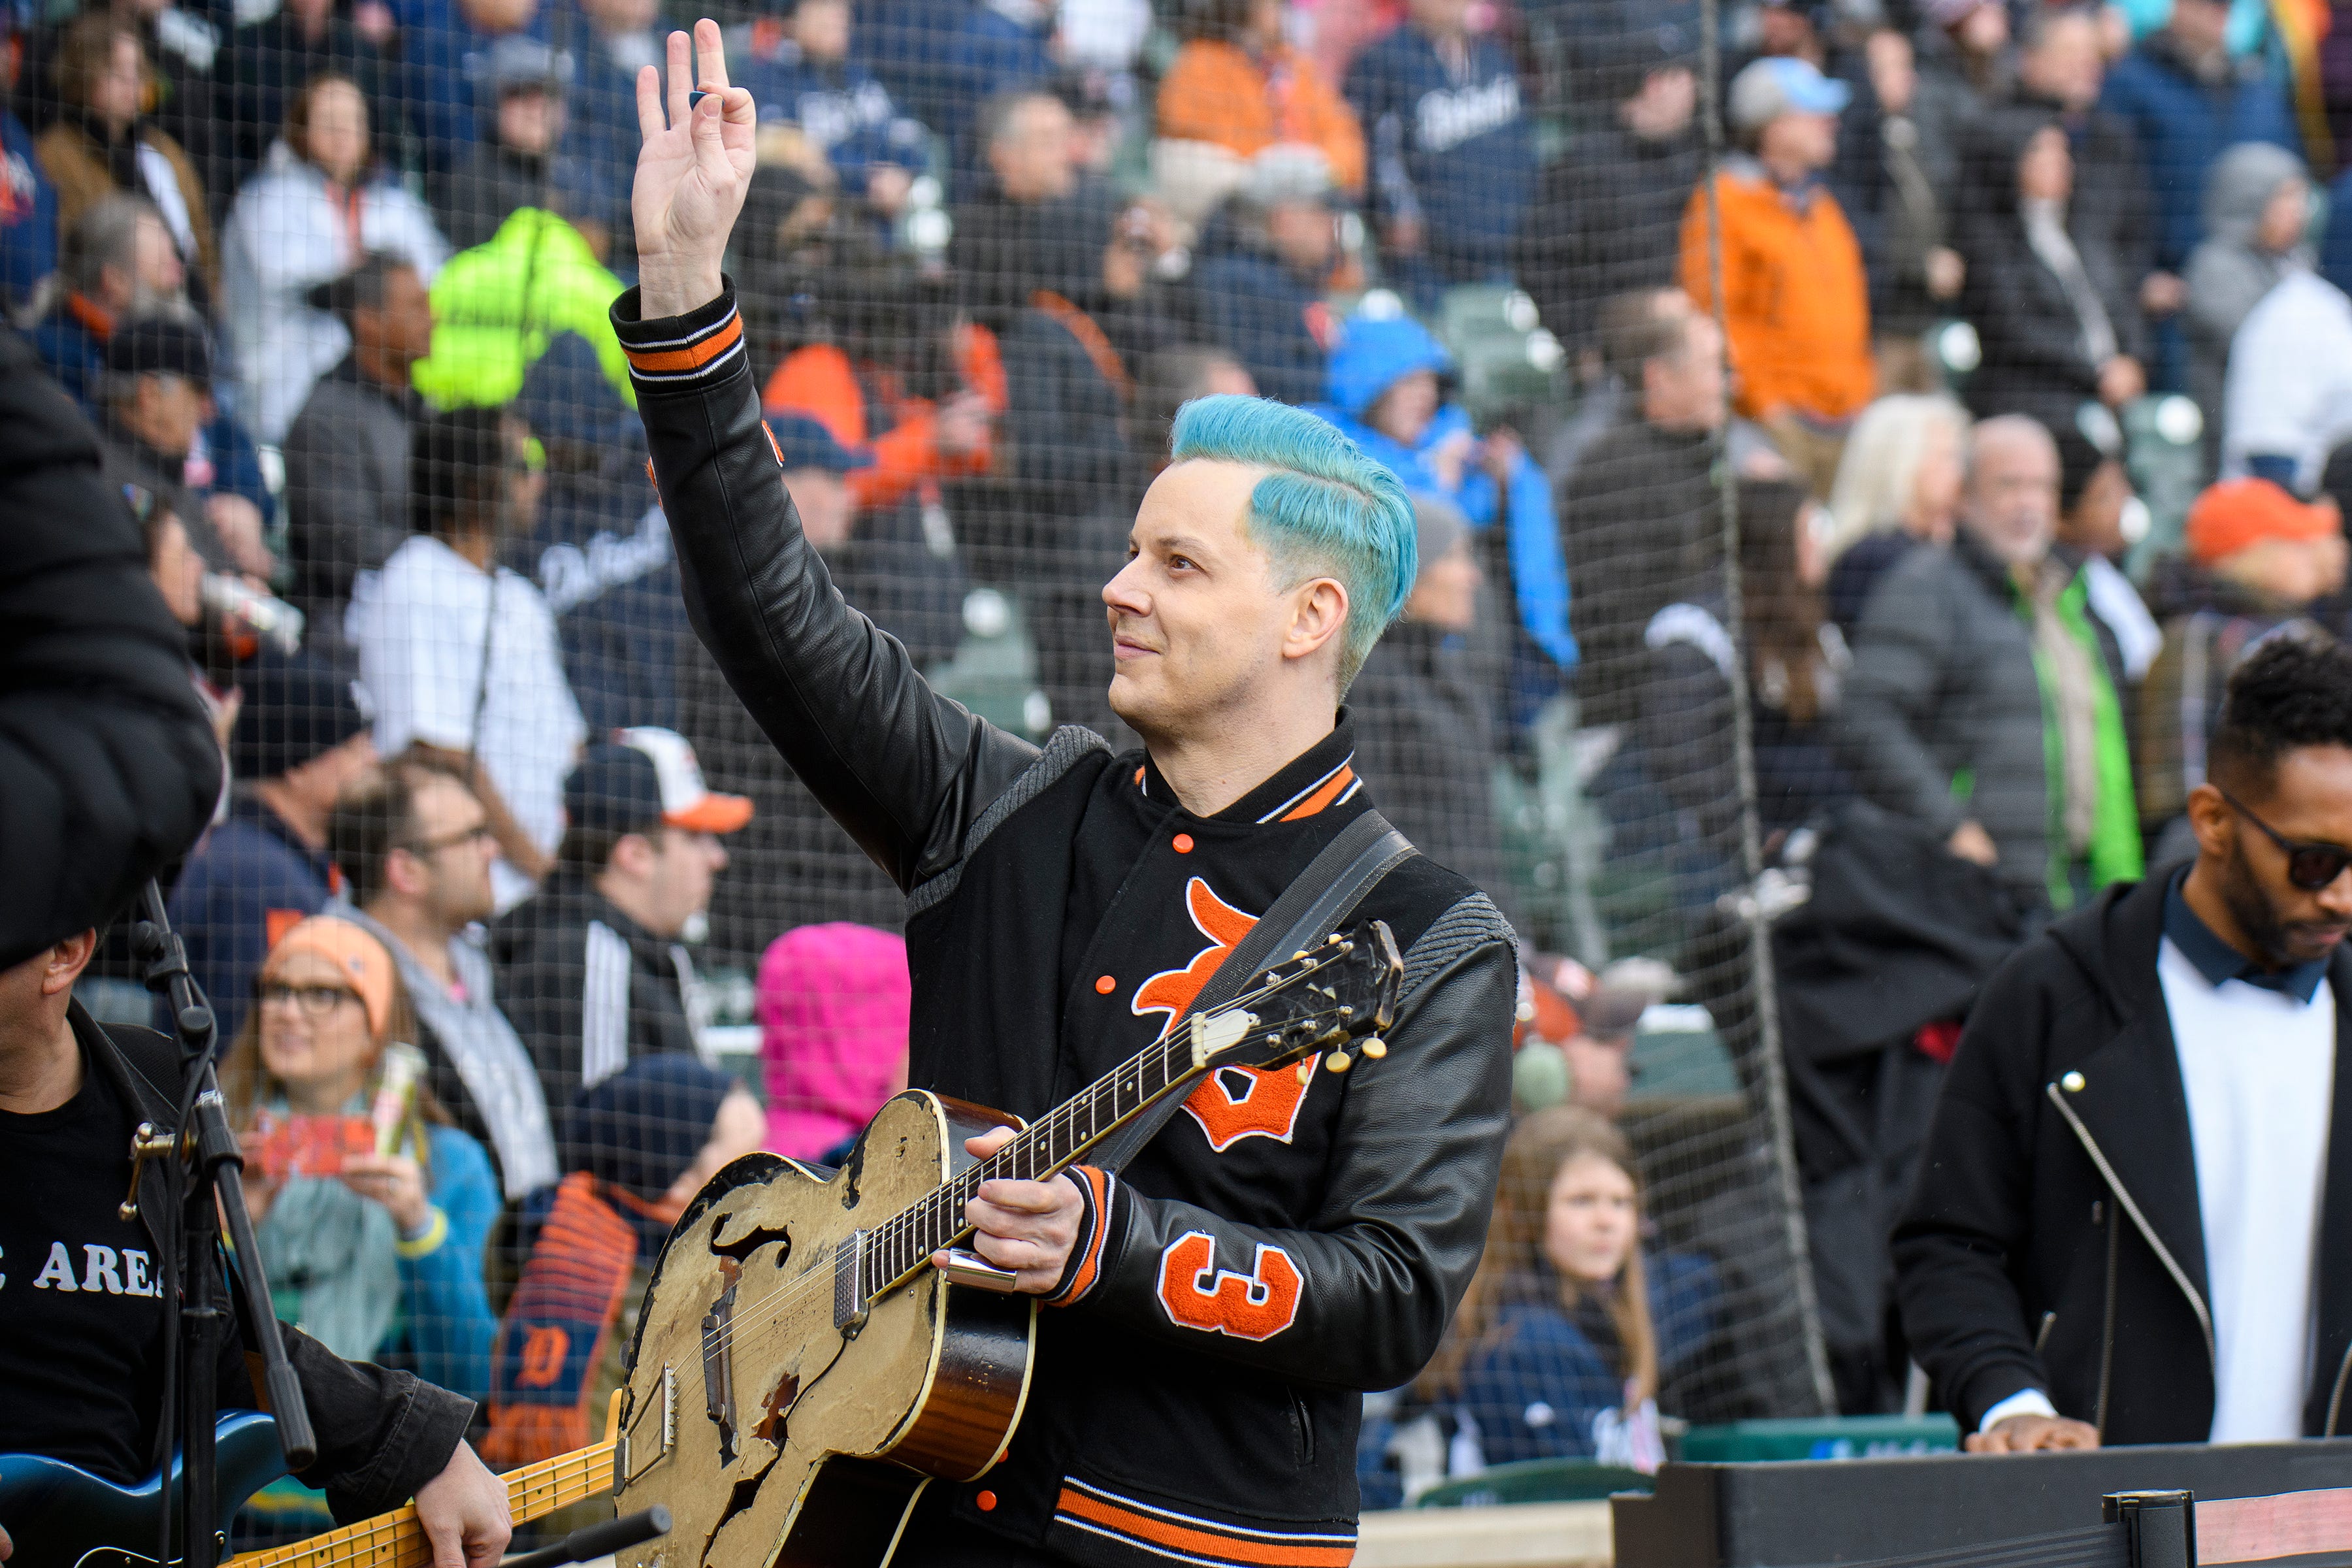 Detroit native Jack White waves to fans during Opening Day festivities for the Detroit Tigers at Comerica Park, Friday, April 8, 2022 in Detroit.